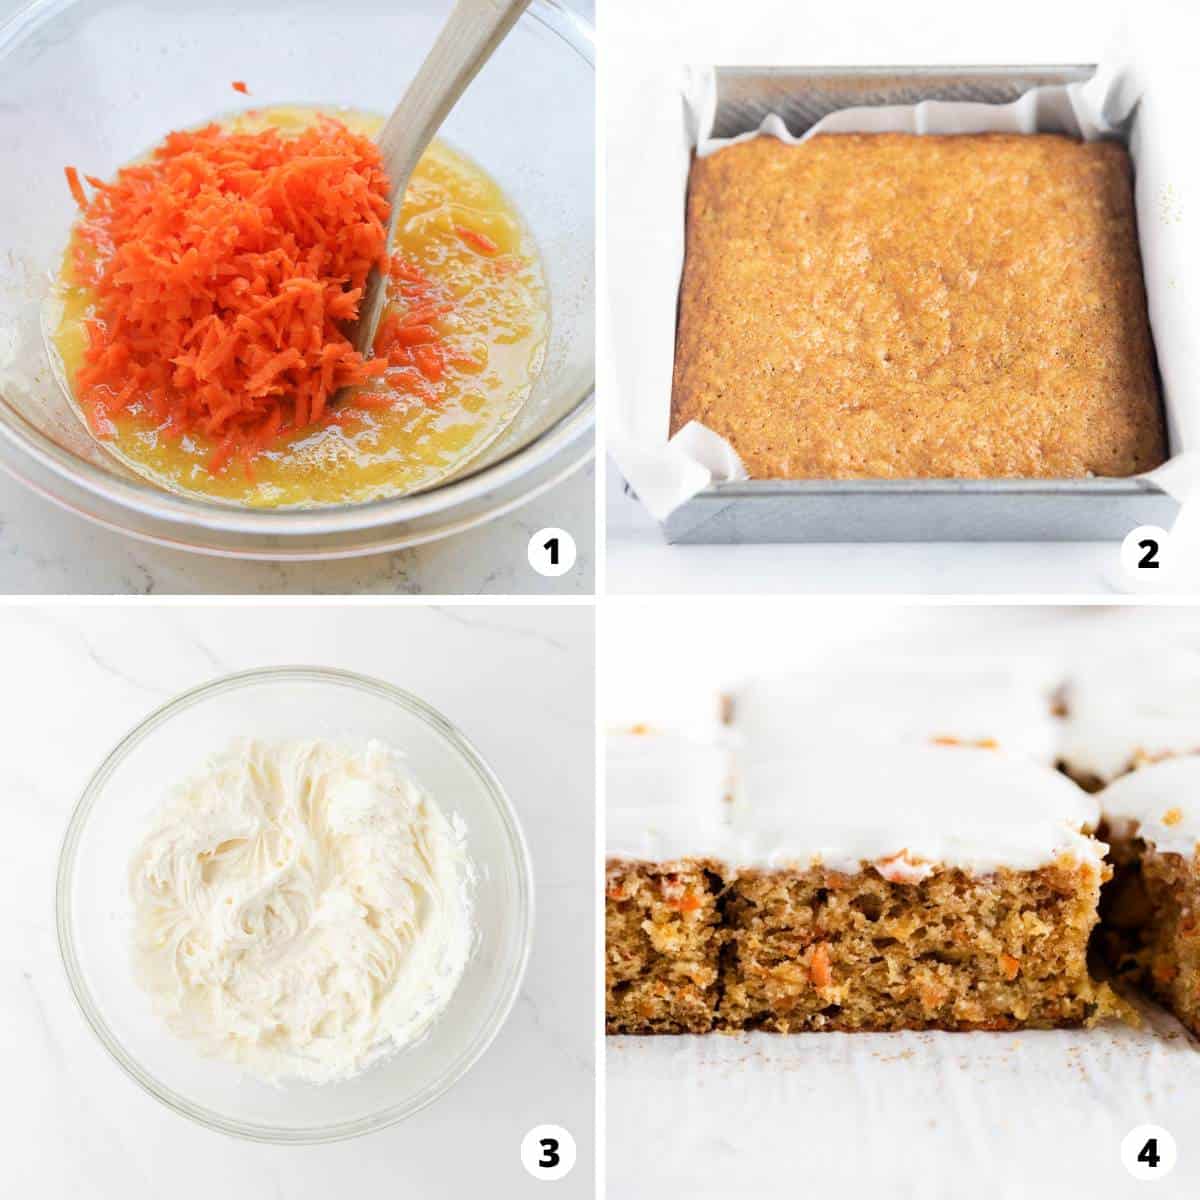 The process of making carrot cake in a four step process. 